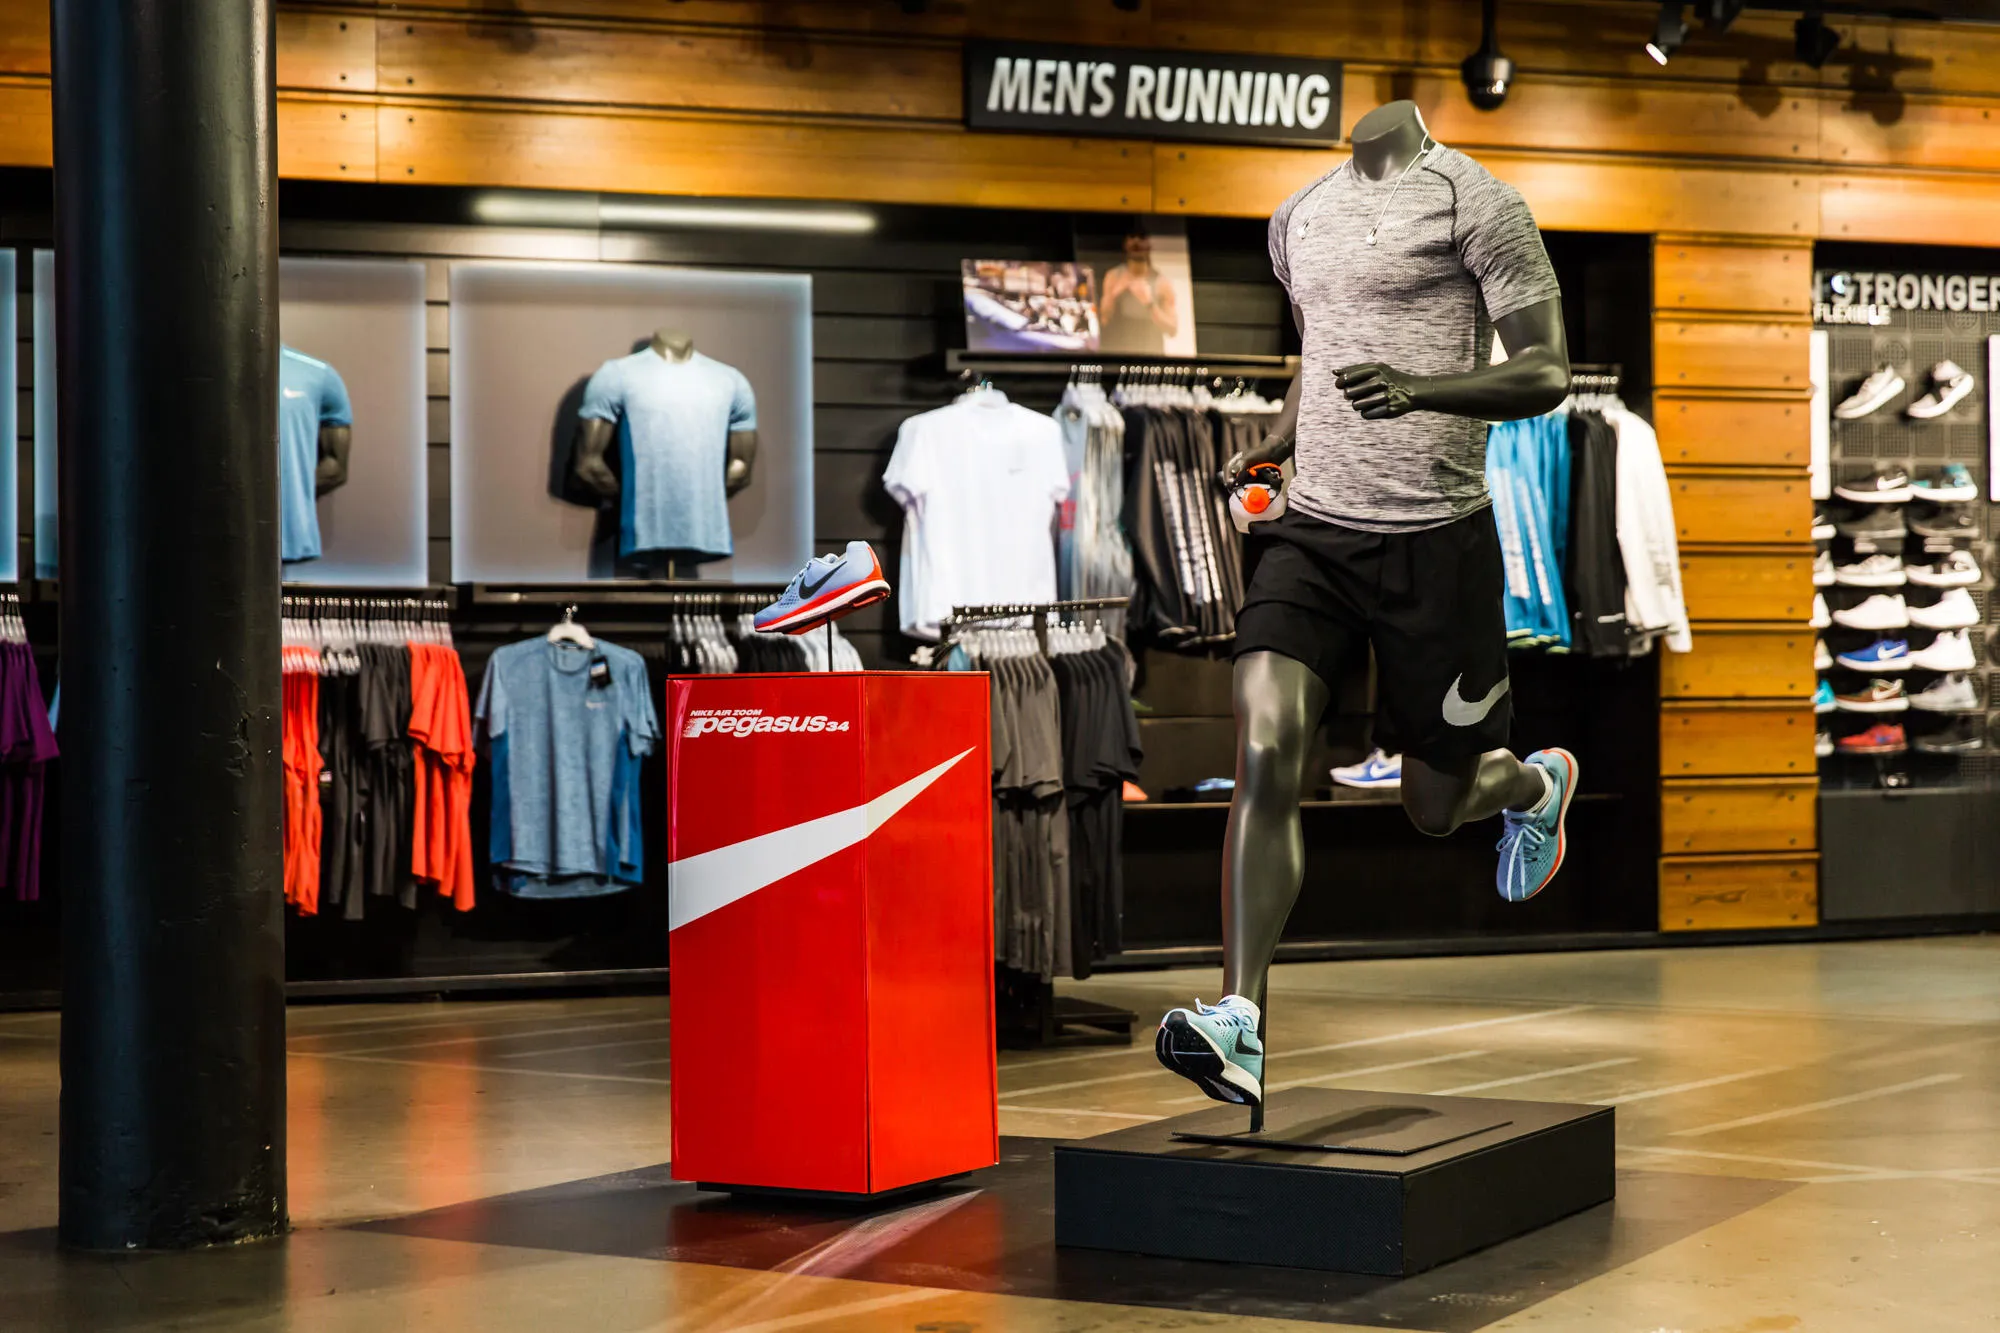 A collection of high-performance sportswear, including running shoes, athletic apparel, and fitness accessories